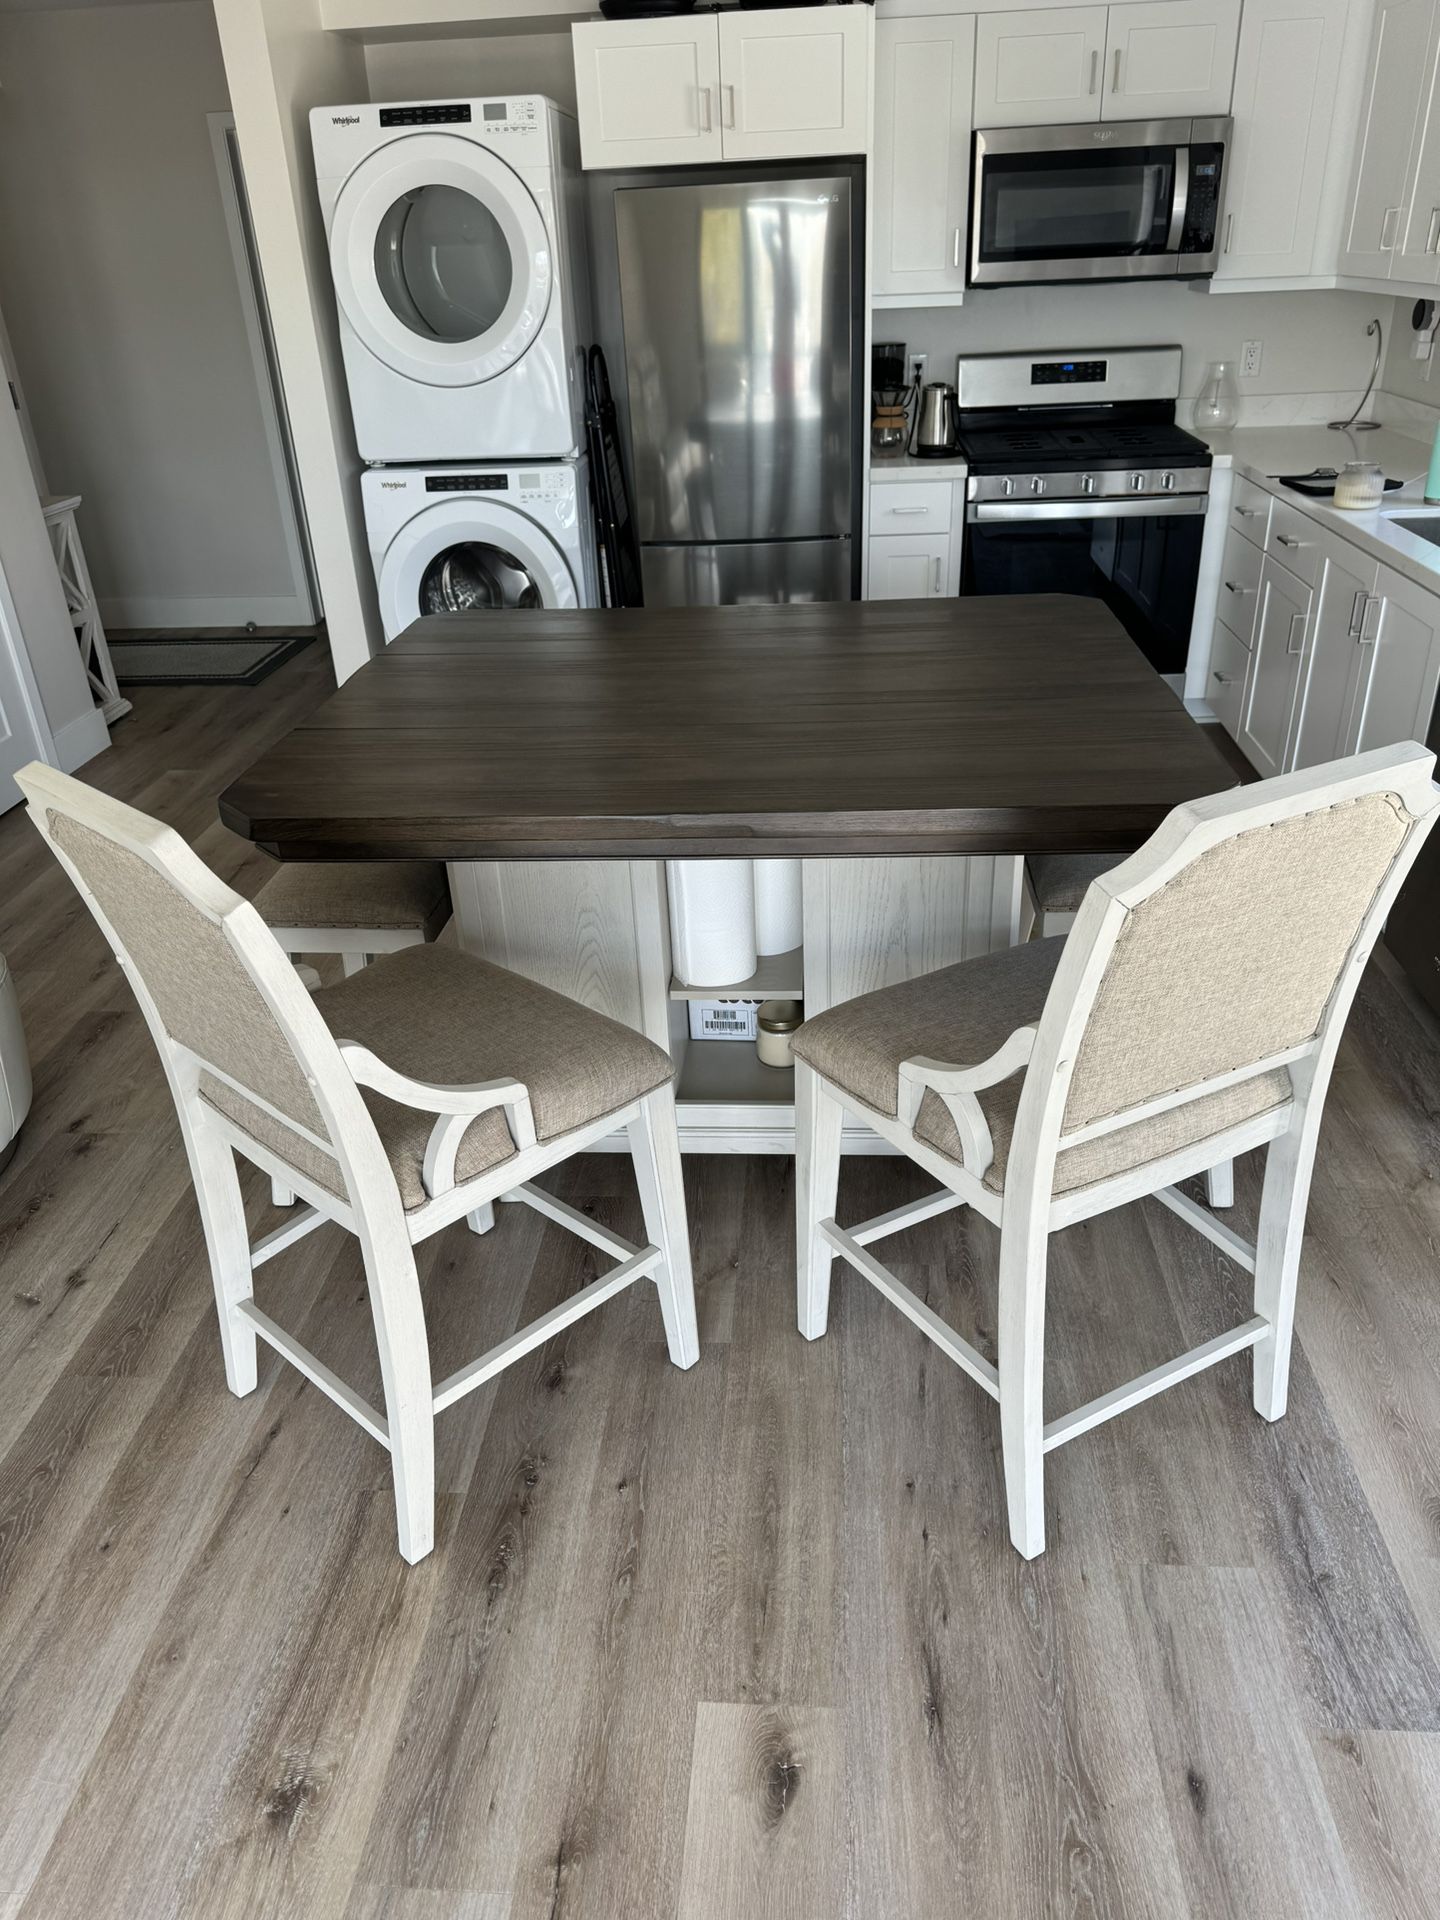 Kitchen Island Table With Chairs & Stools 